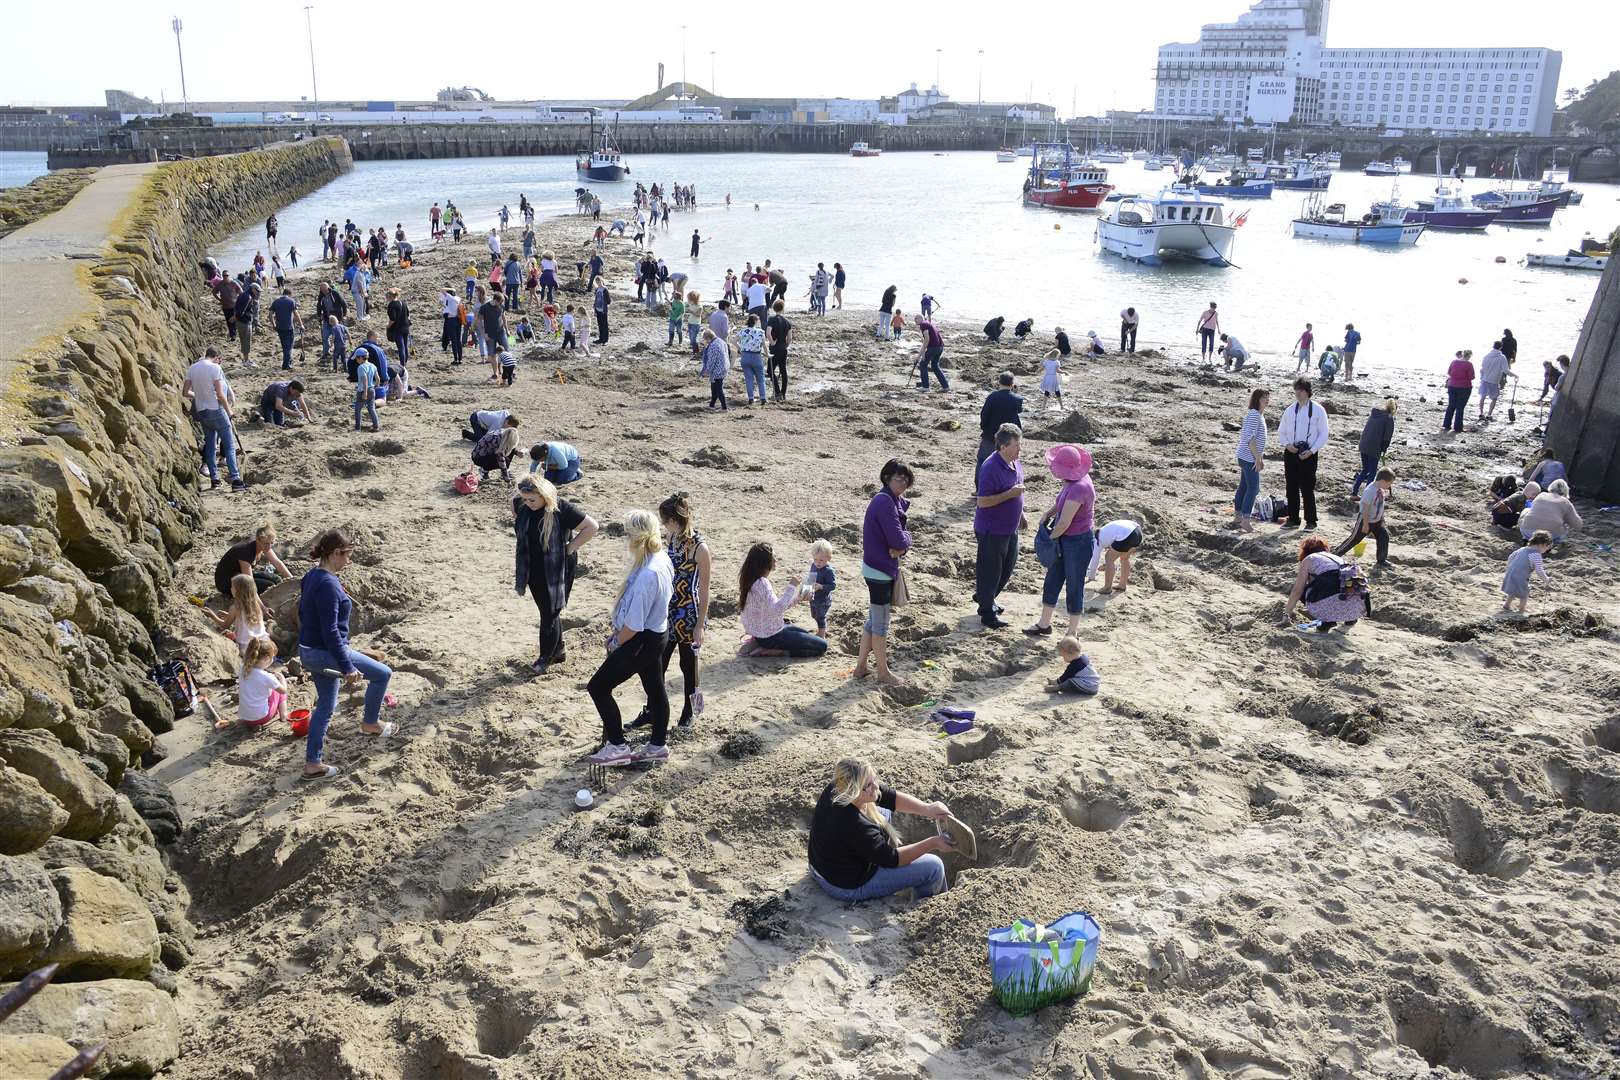 As part of the 2014 Triennial 30 gold medallions were buried at the beach. Picture: Paul Amos